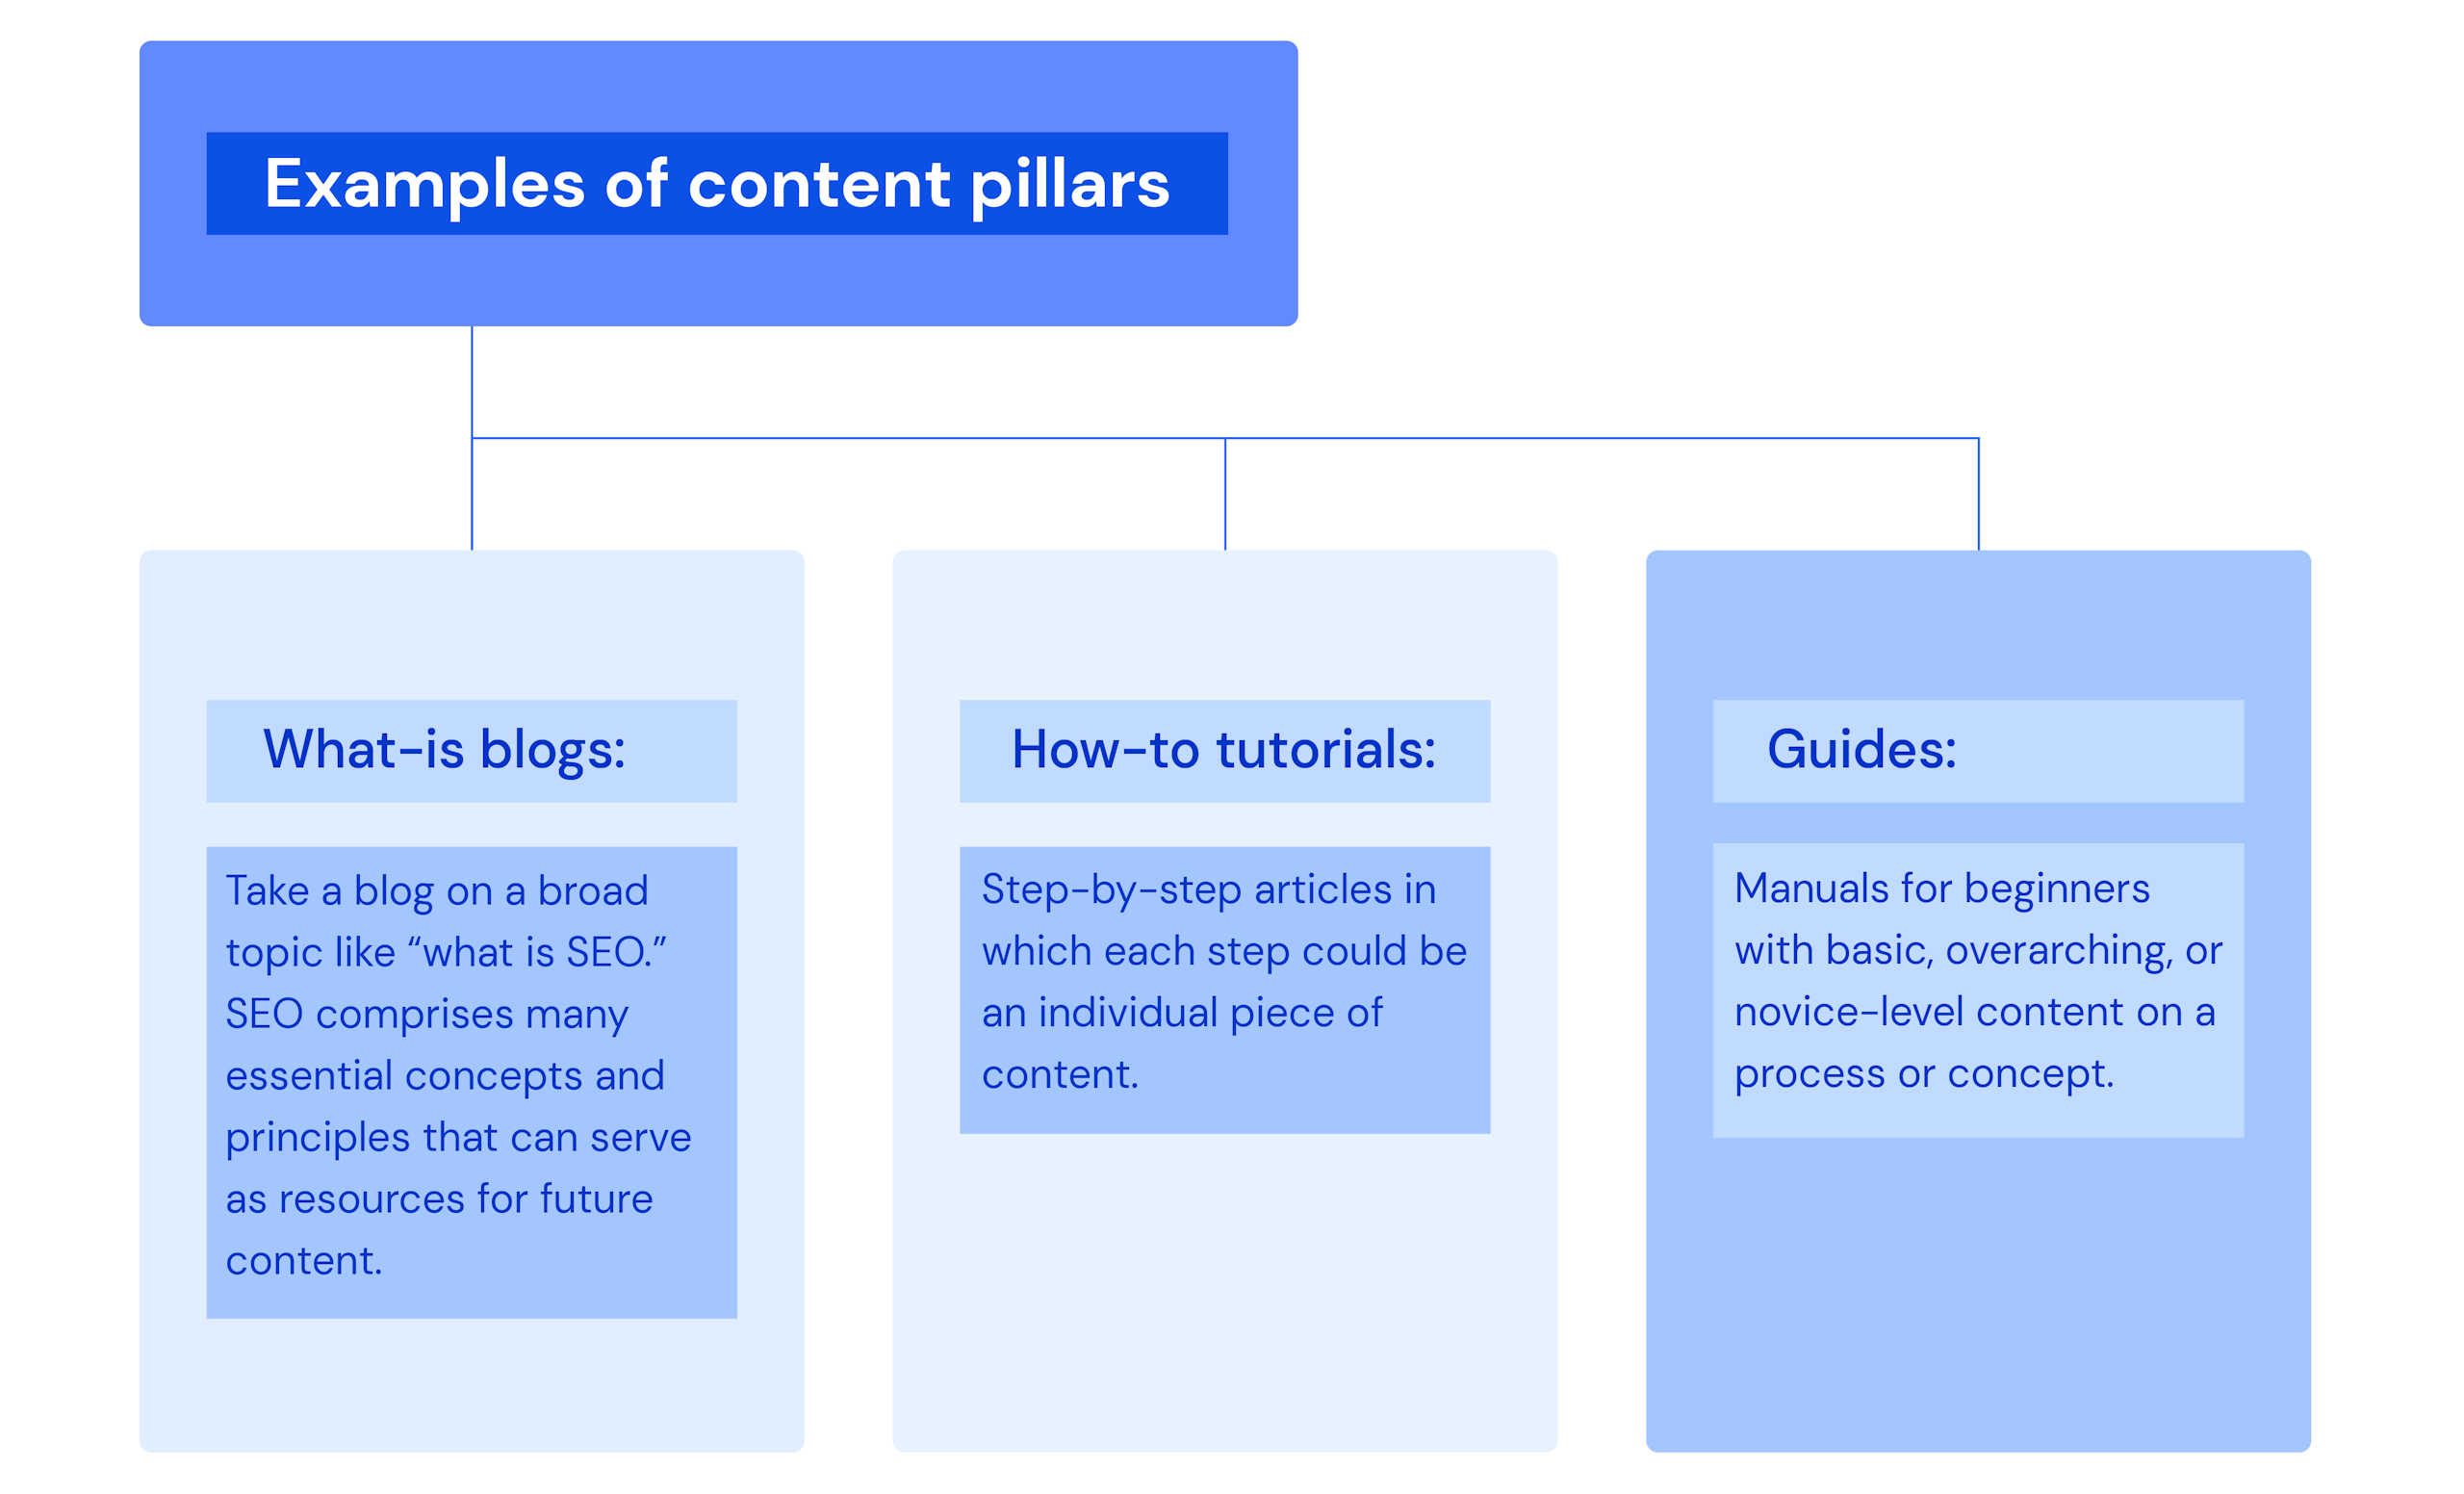 Examples of content pillars